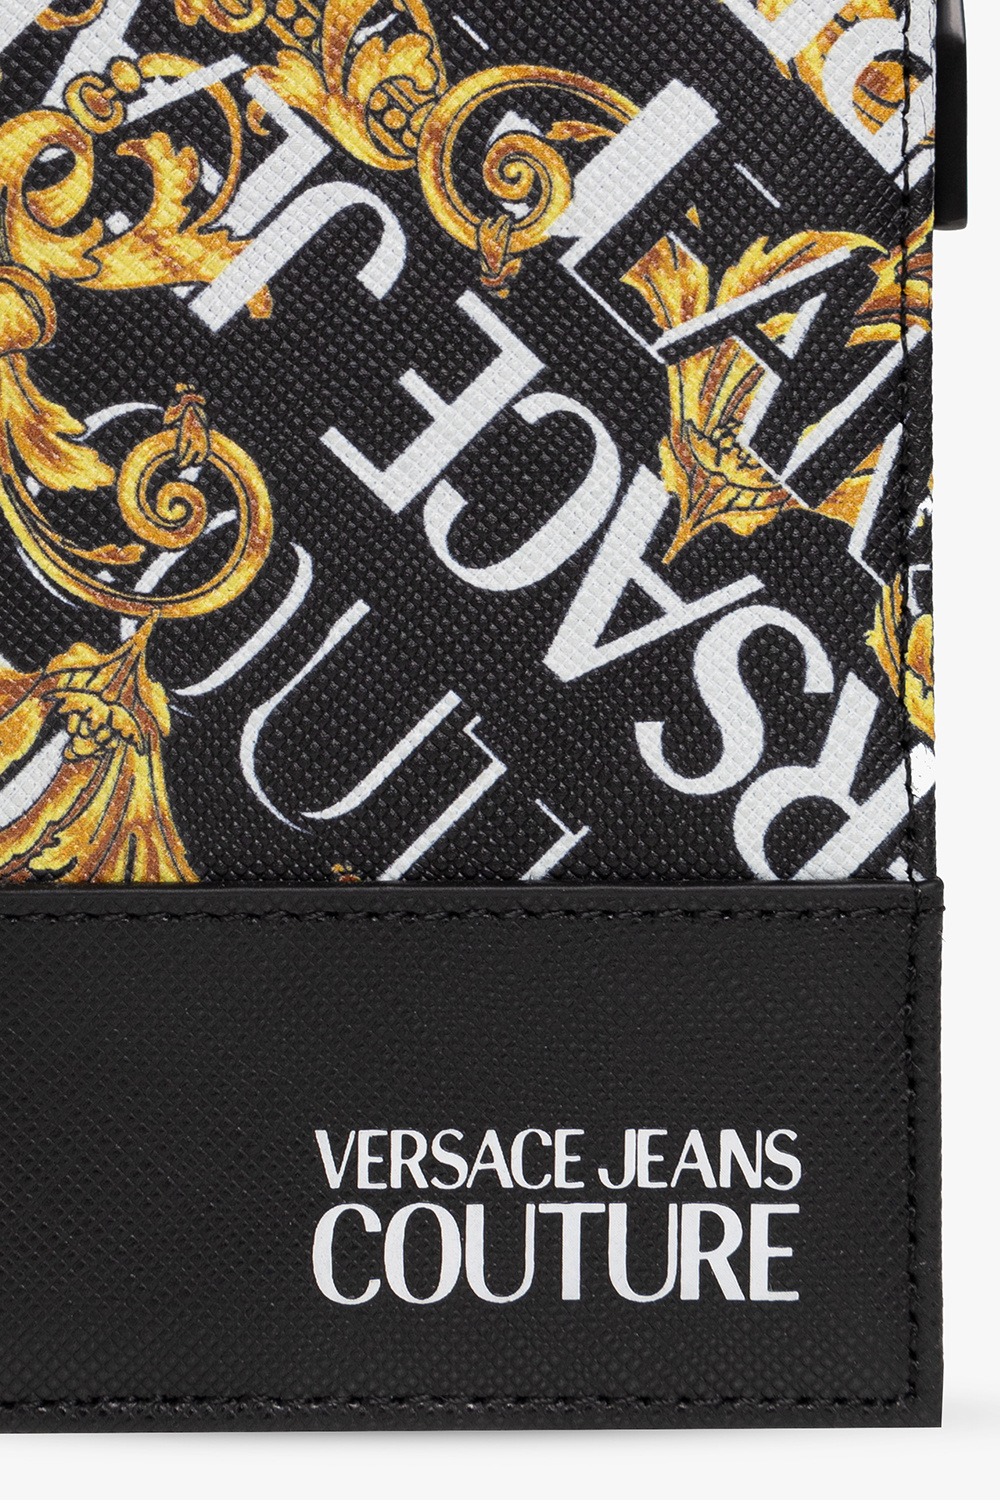 Versace Jeans Couture Womens Superdry Green Shorts